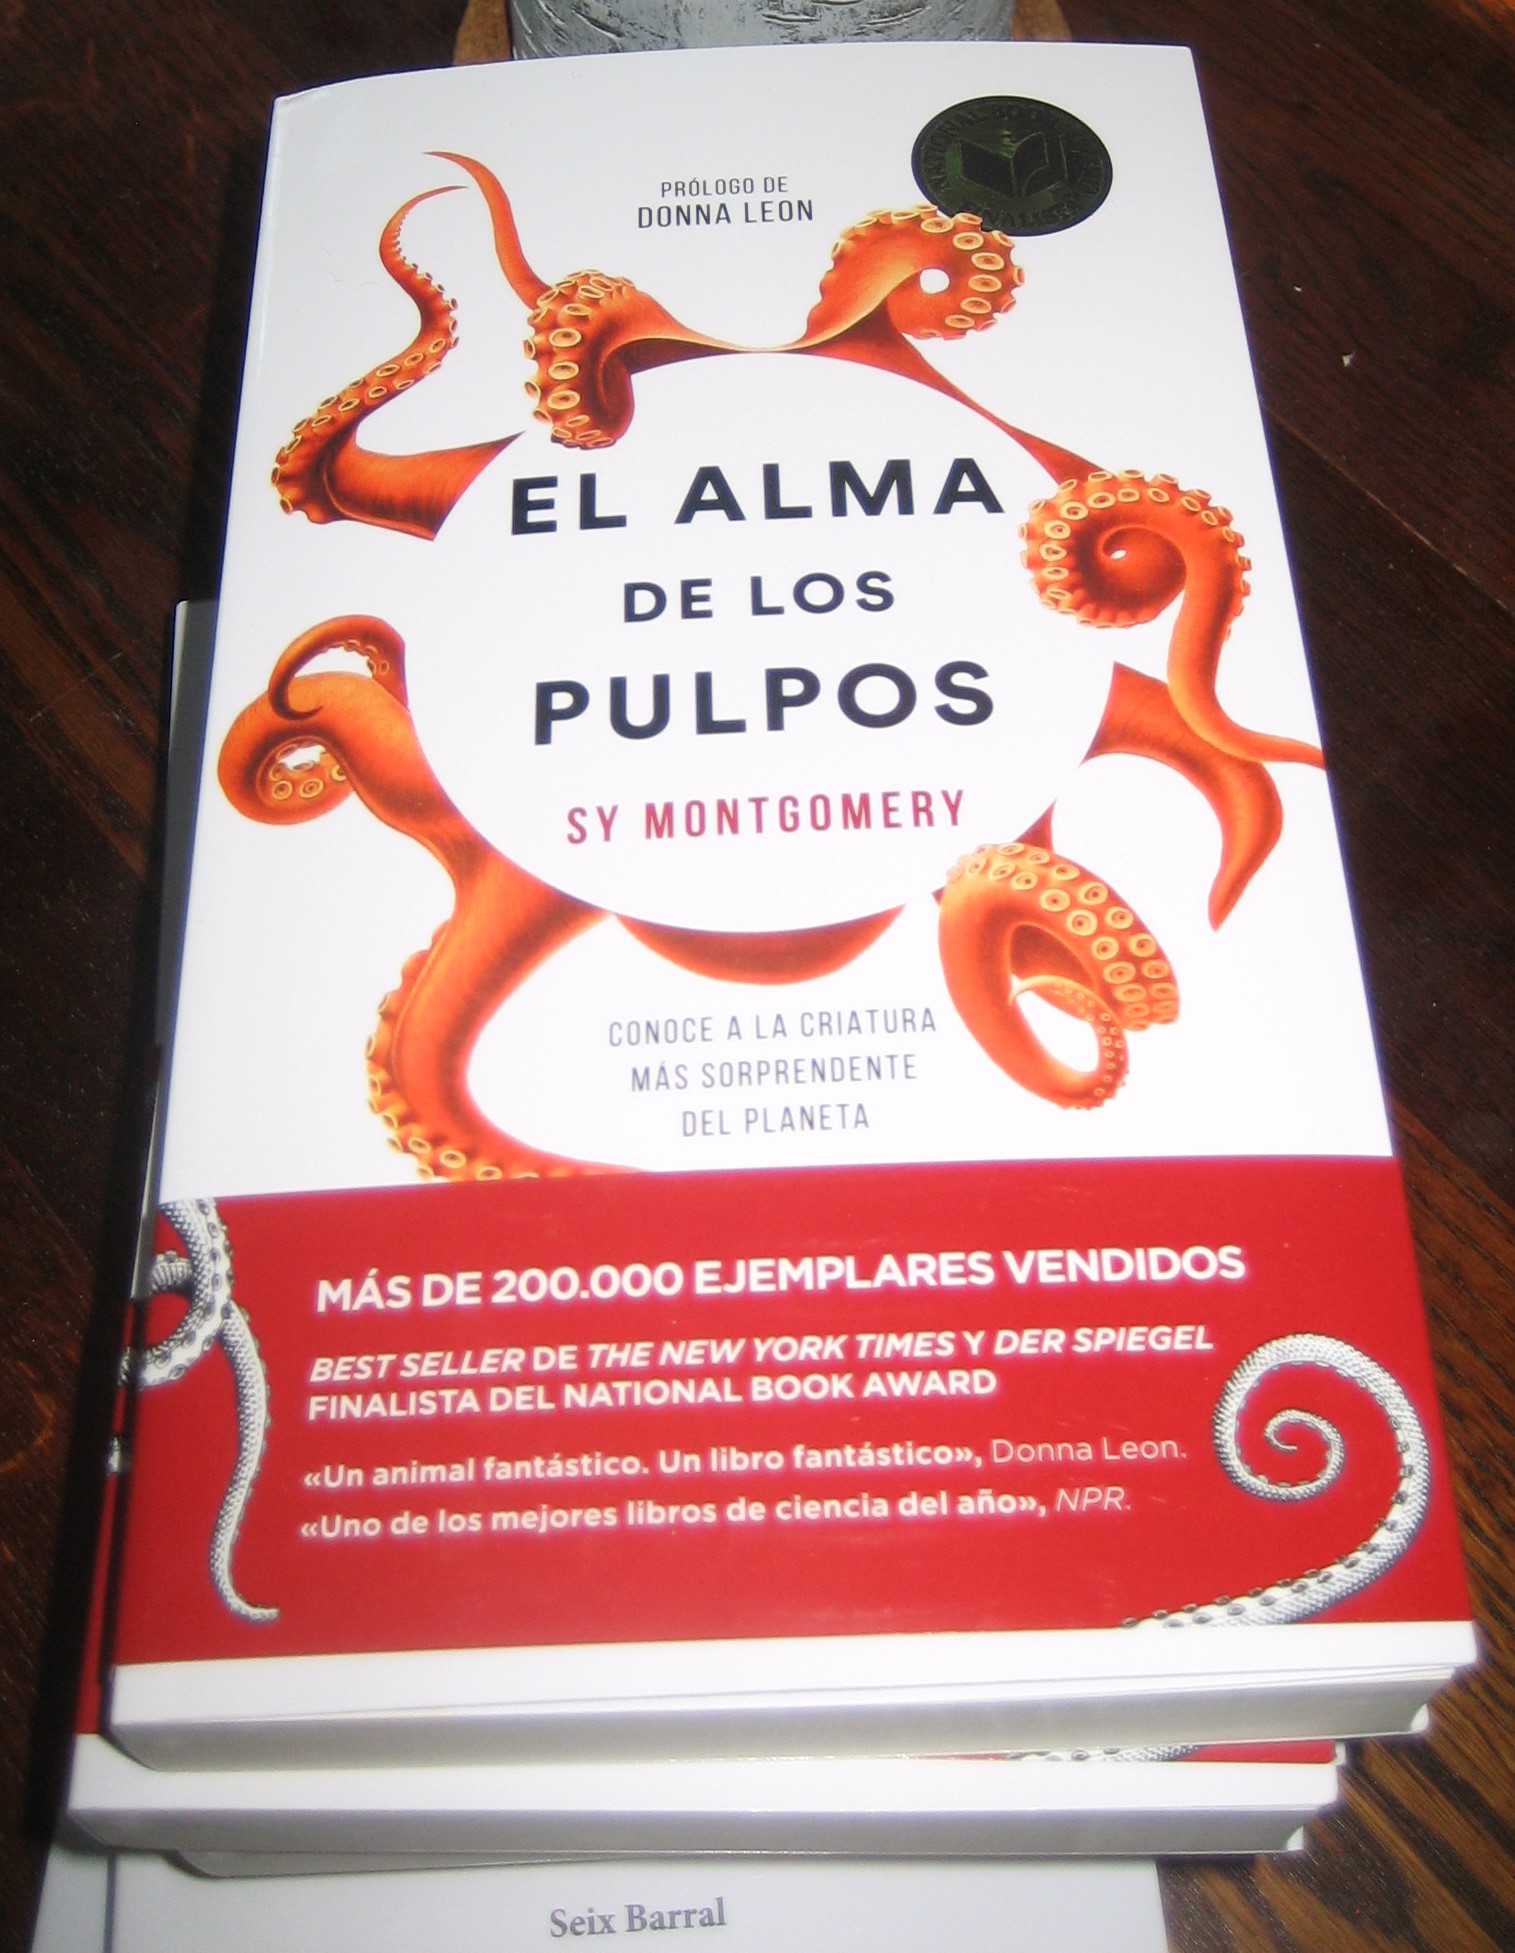 The Spanish edition of Soul of an Octopus